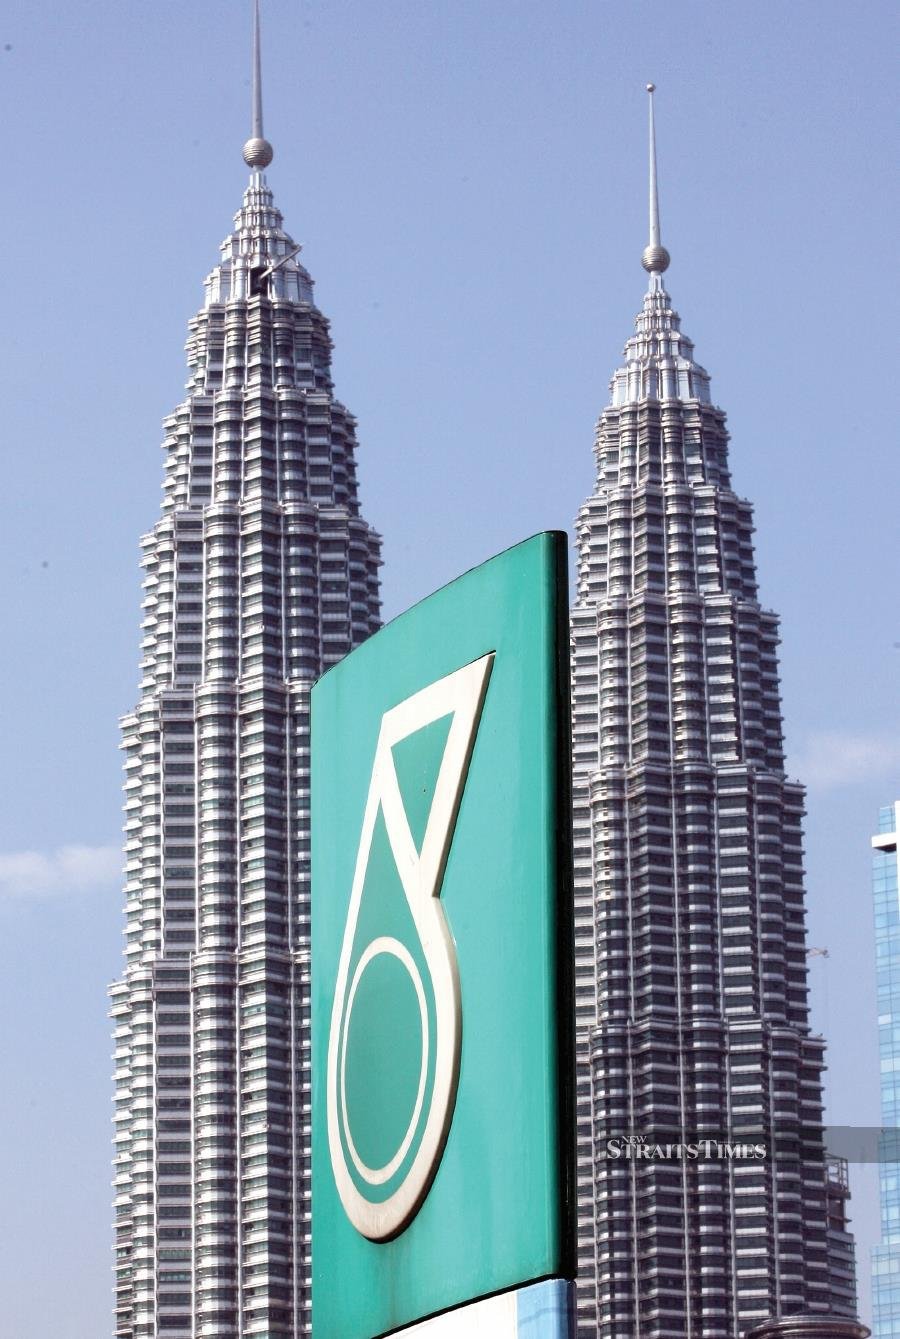 The Petronas twin towers is seen behind the company coporate logo in downtown Kuala Lumpur. AFP PHOTO